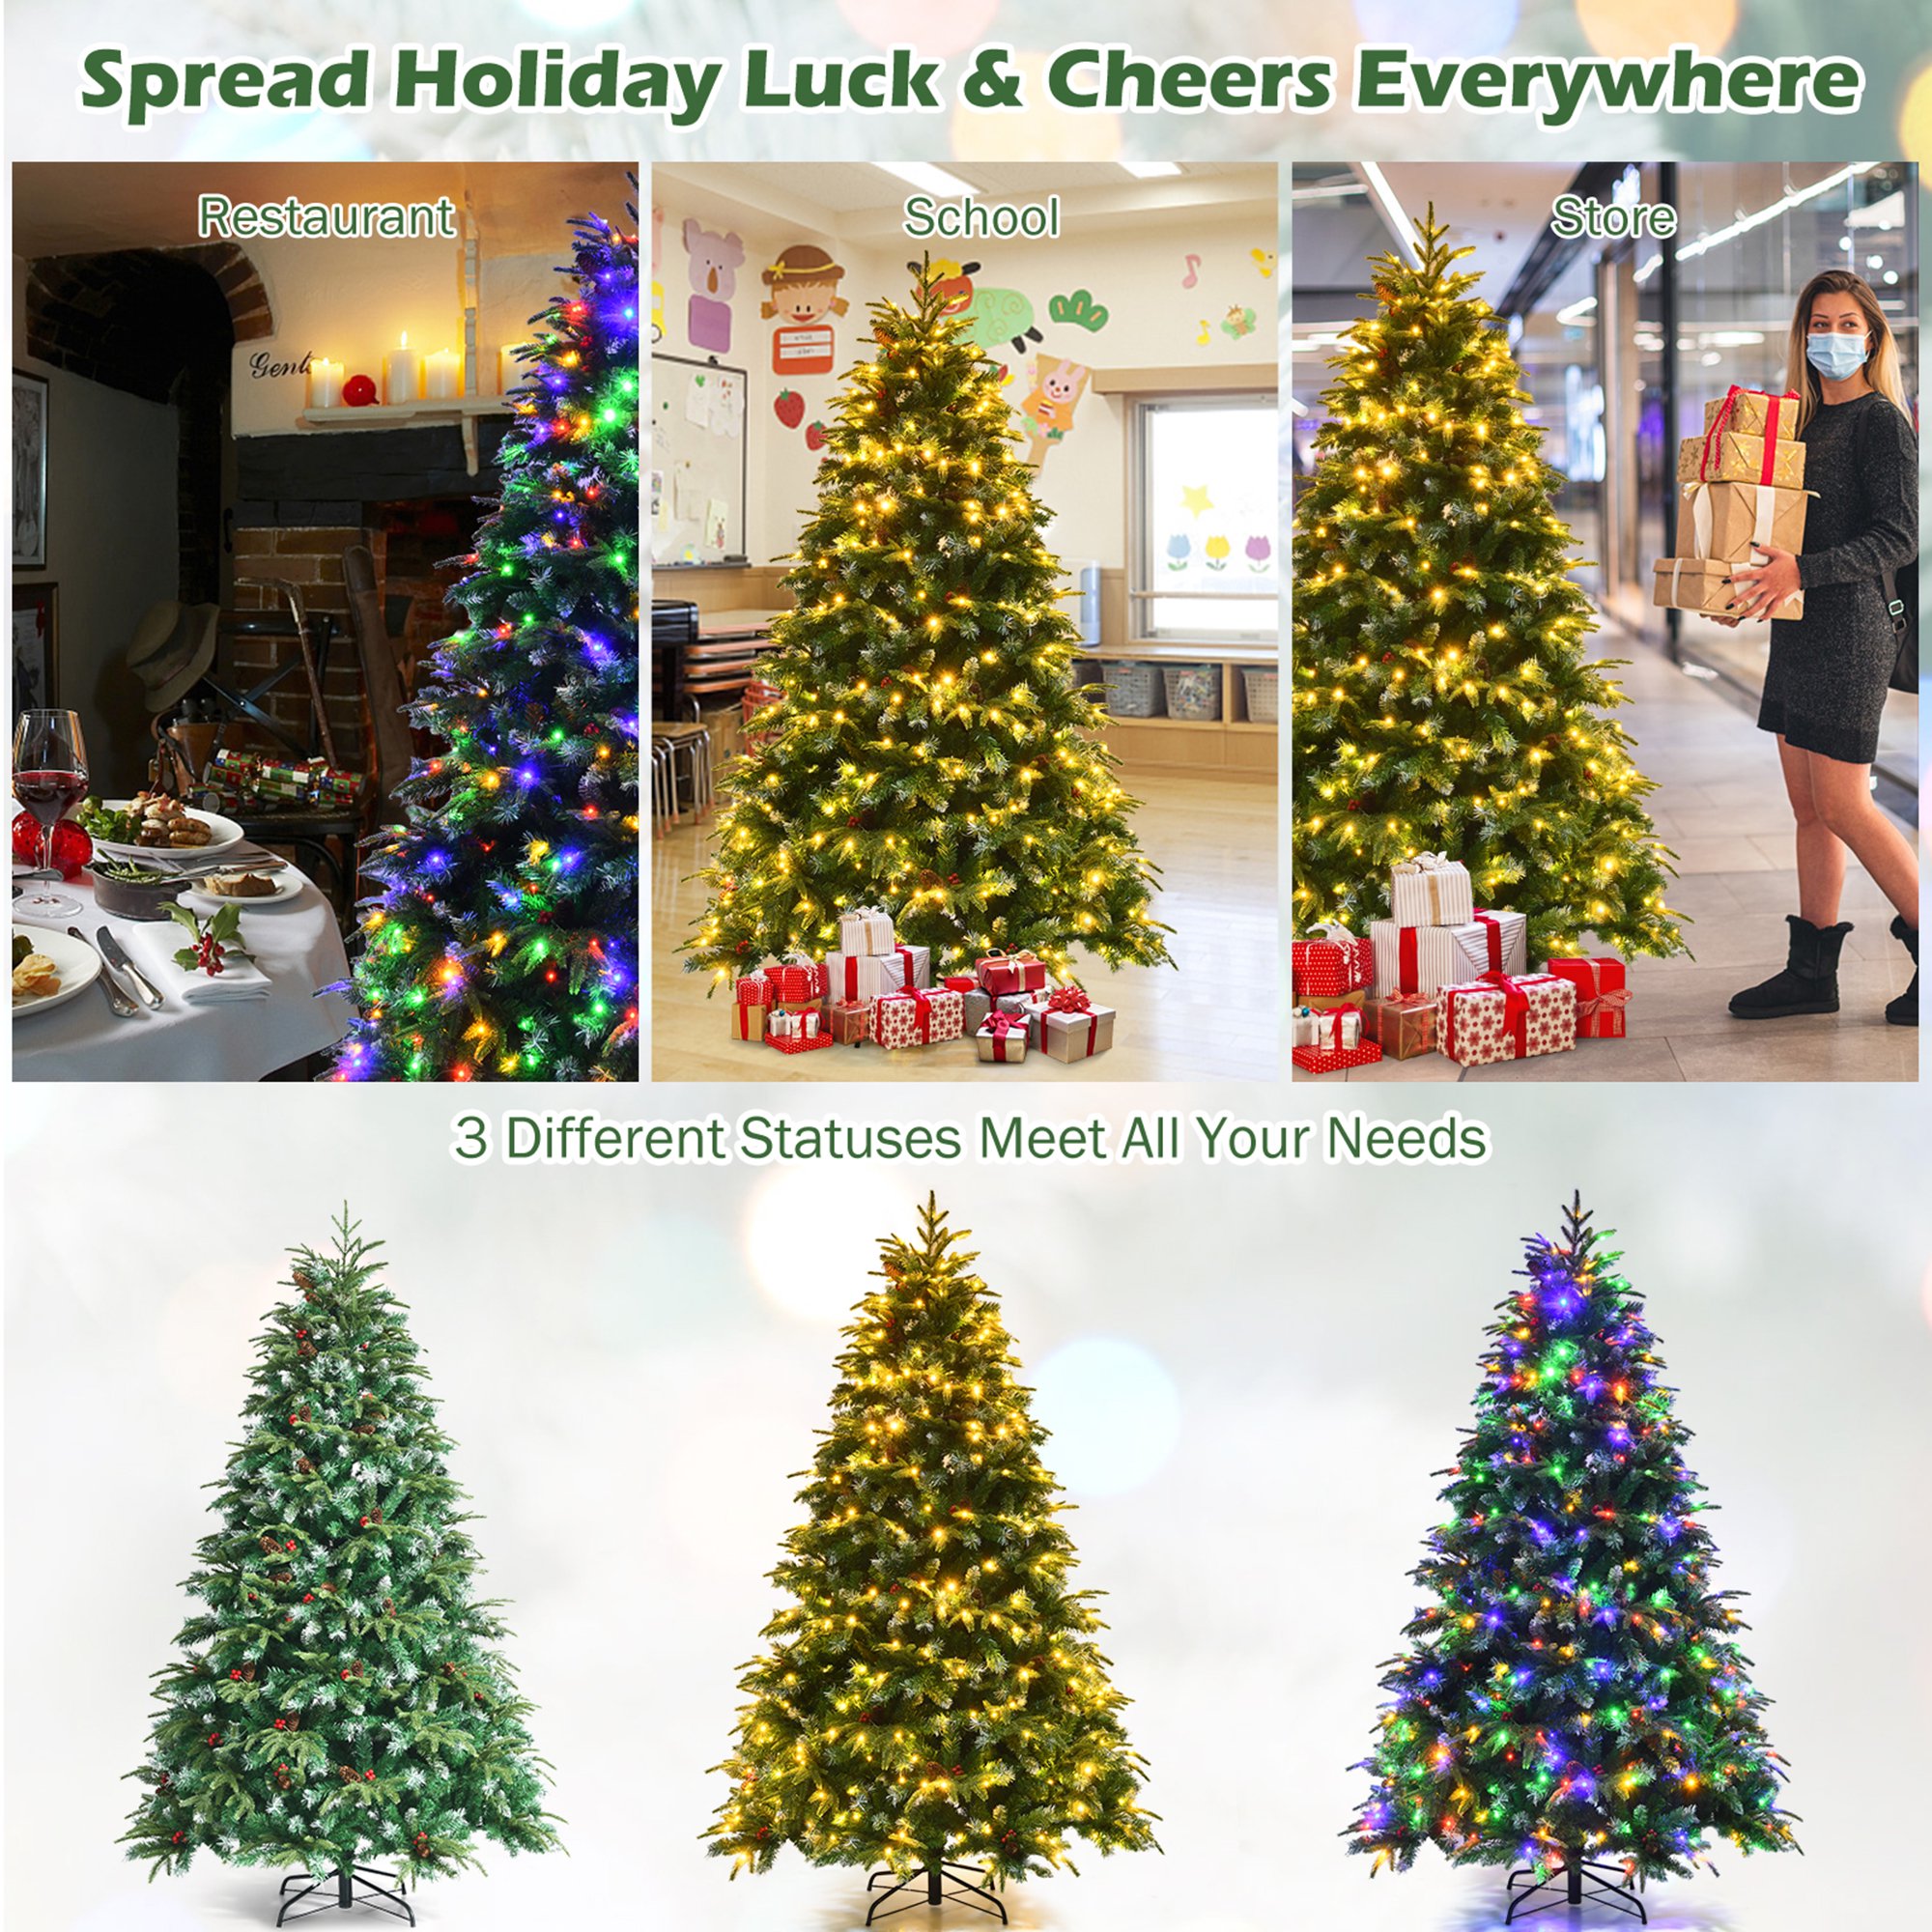 Gymax 6 ft. Artificial Christmas Tree Hinged Tree with Pine Cones